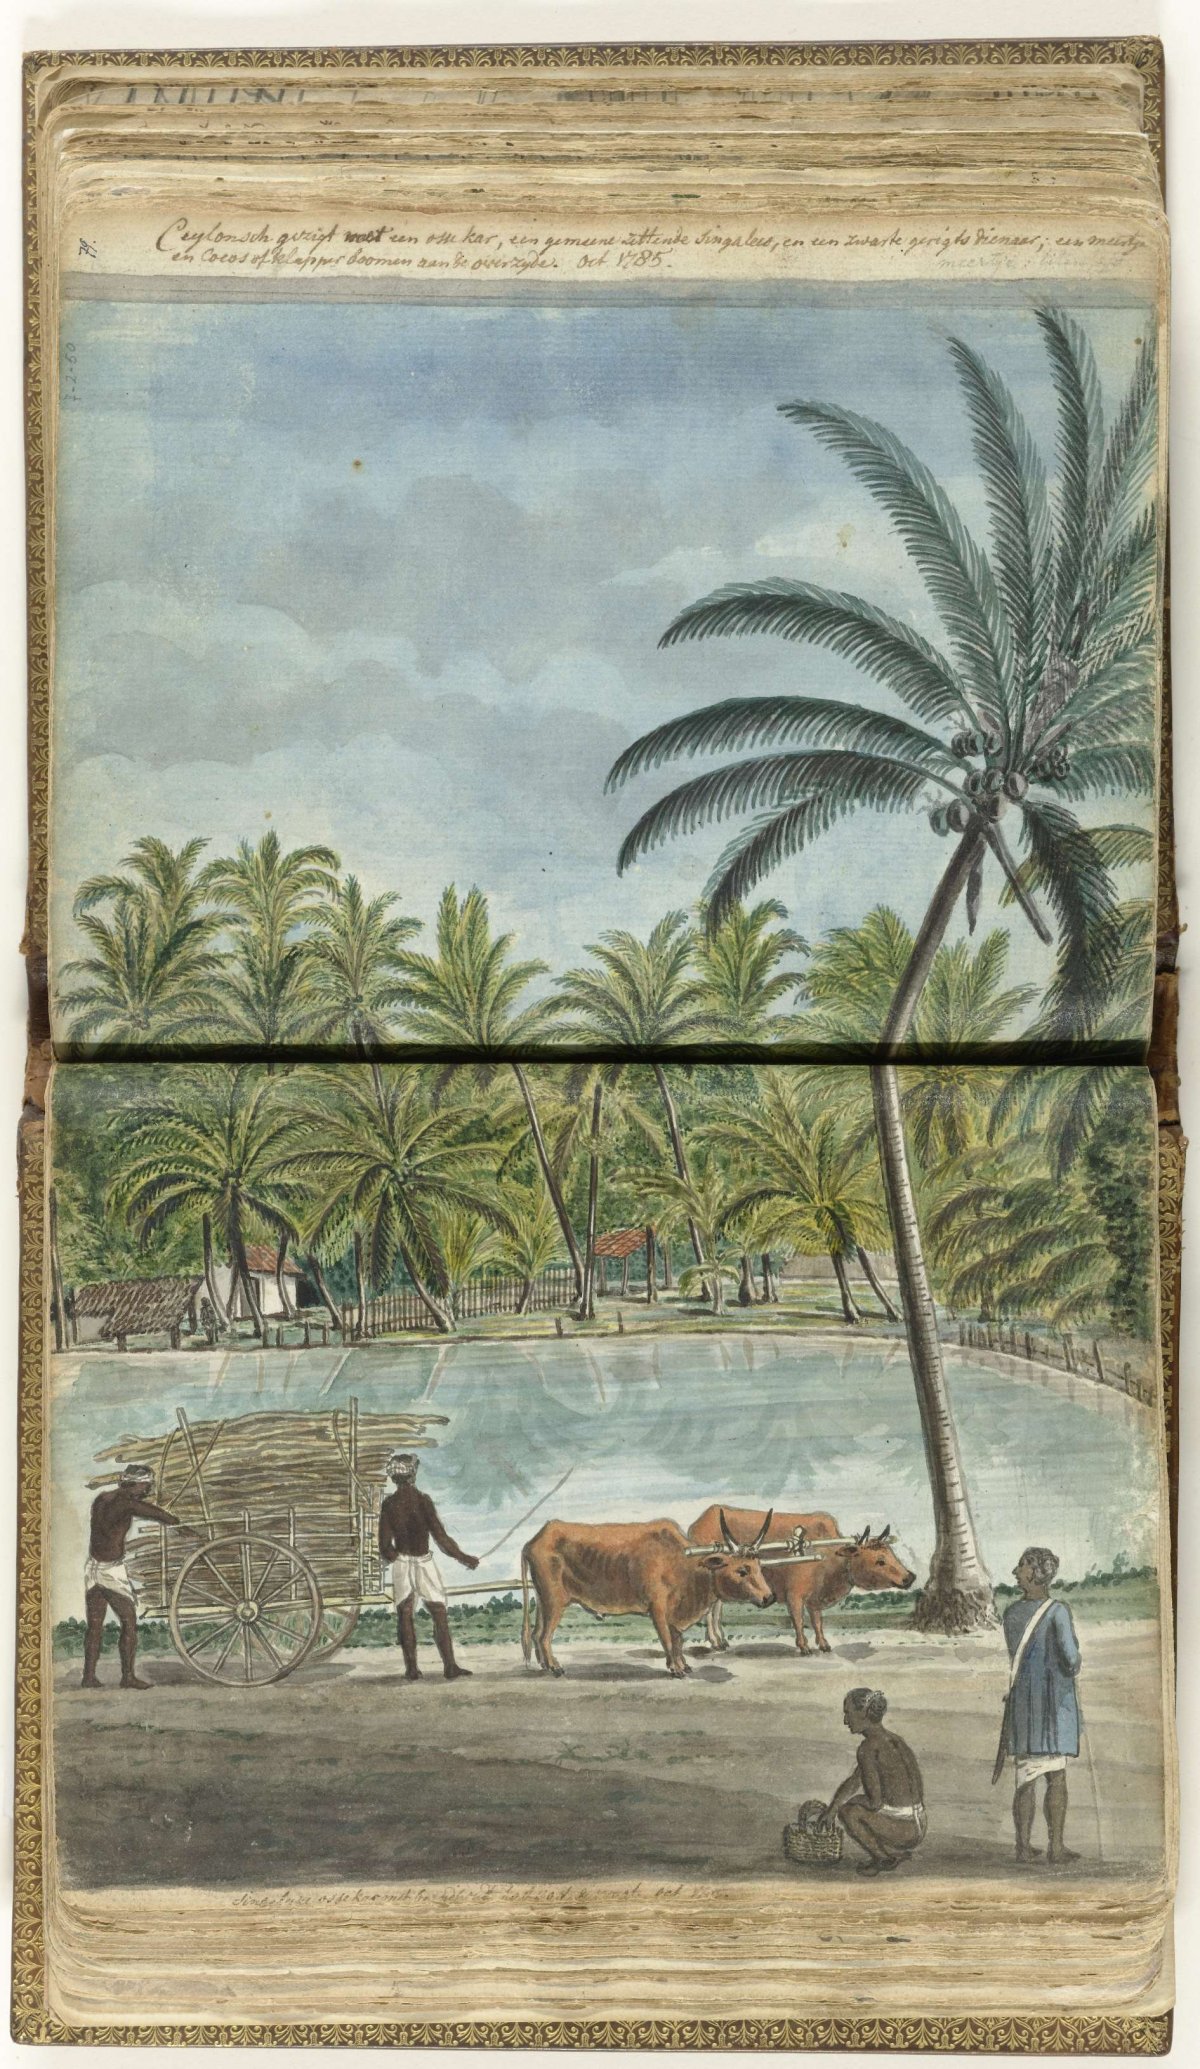 Ceylon's face with an ox cart, a crouching singalees and a black court servant, Jan Brandes, 1785